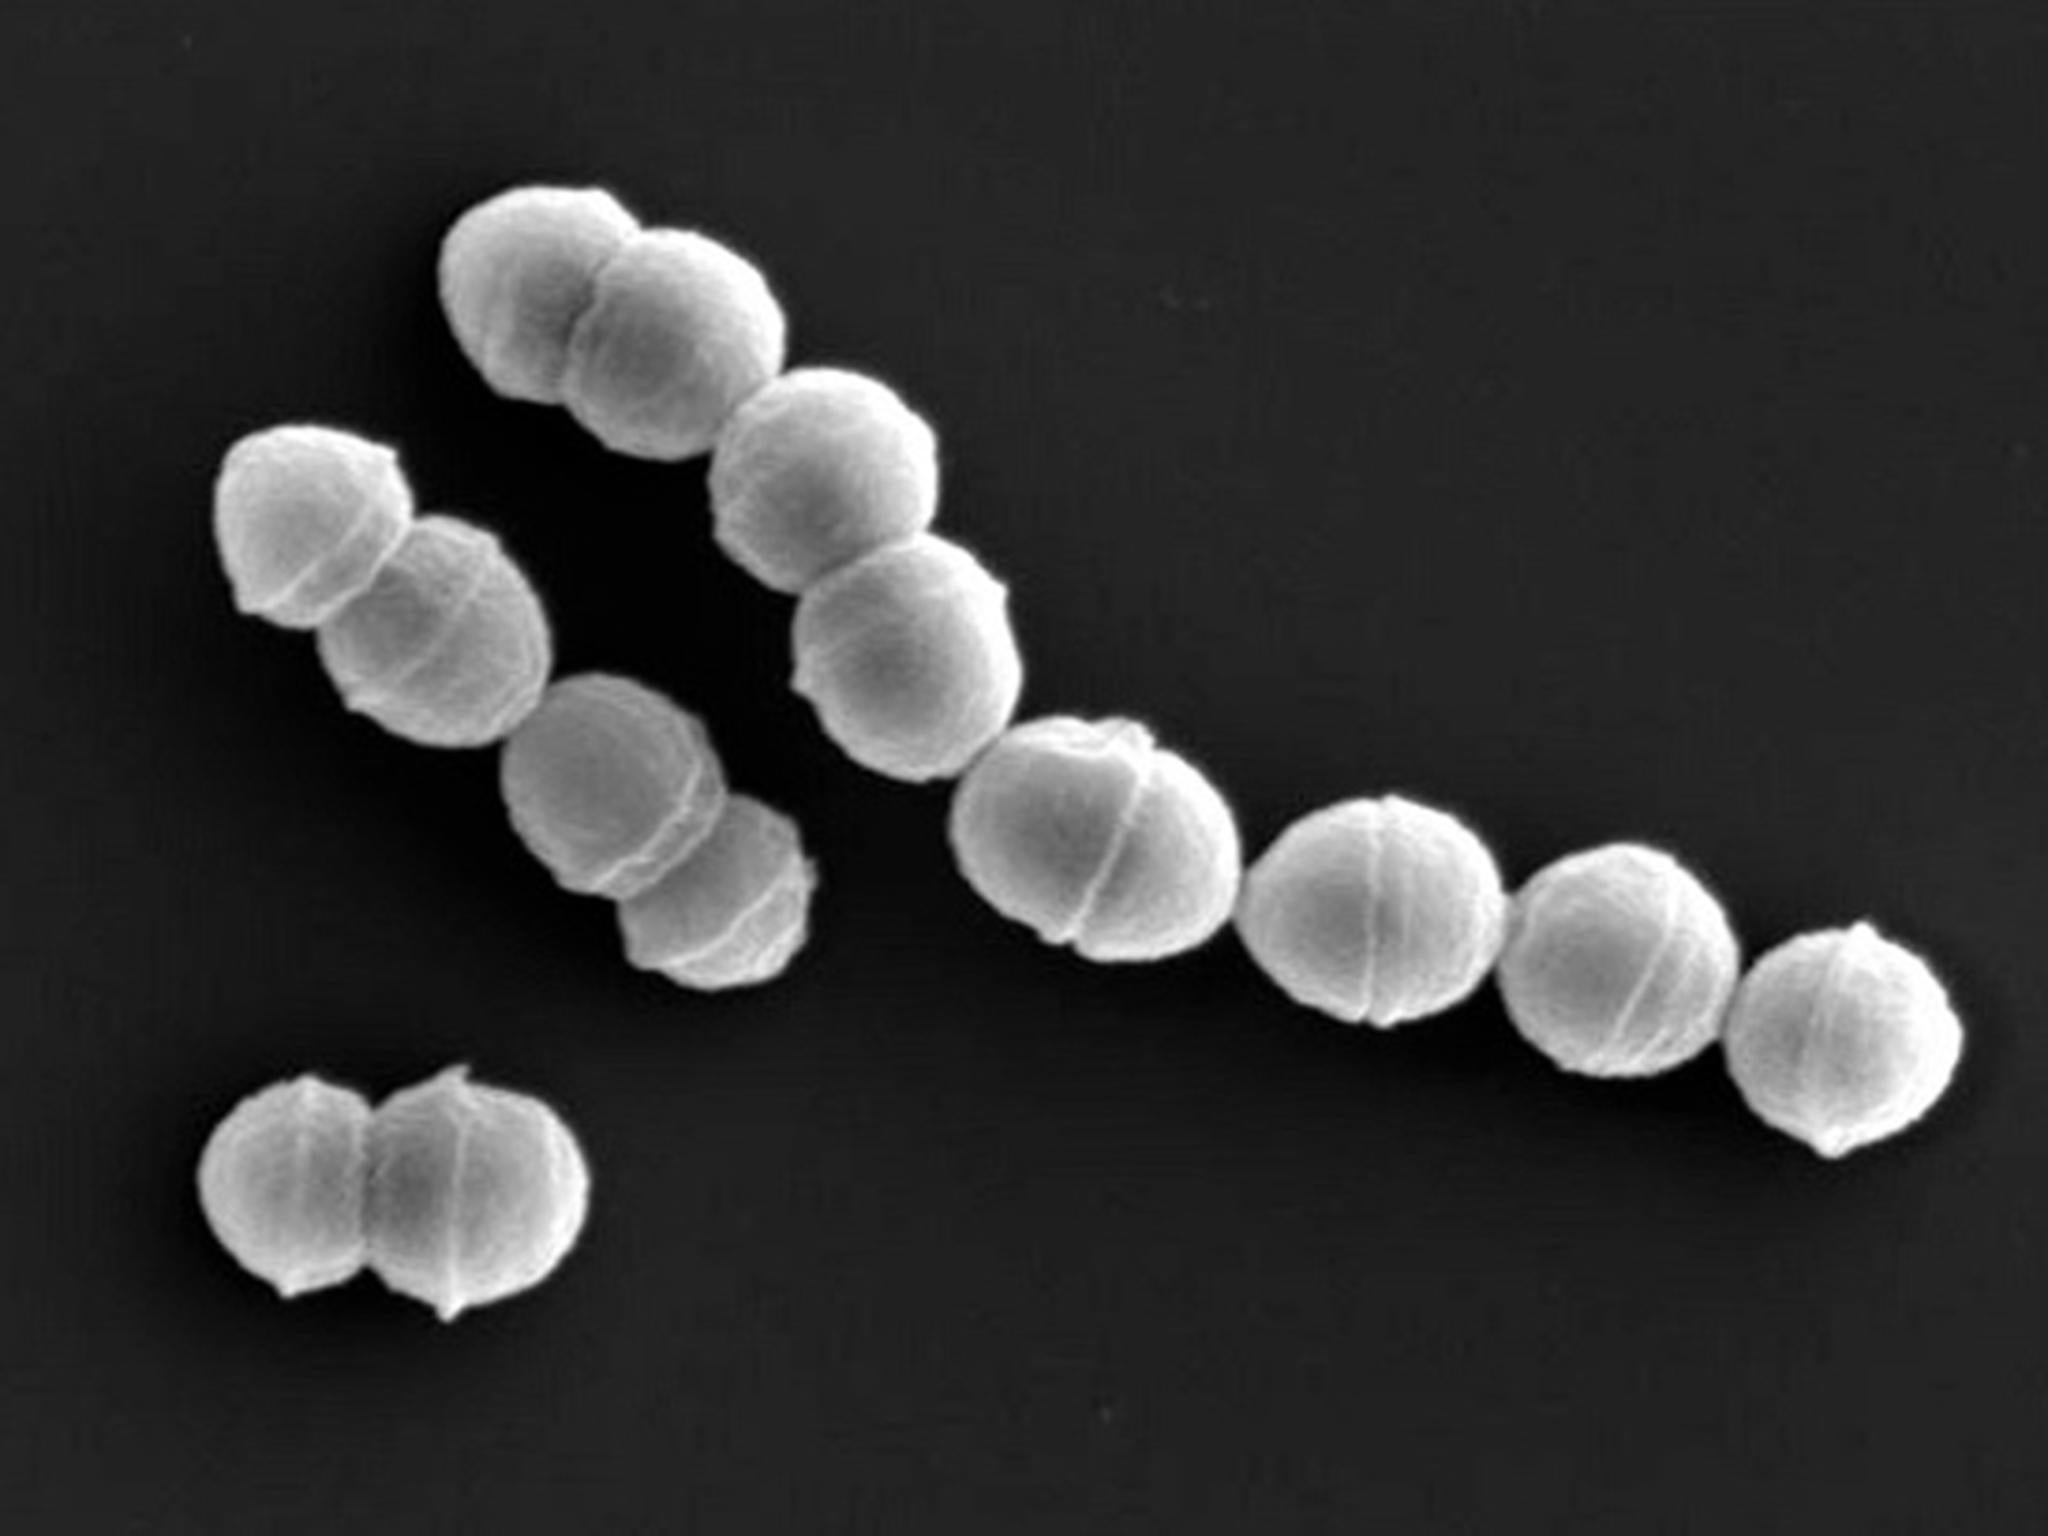 Over 1,000 cases of streptococcal toxic shock syndrome (STSS) were reported in Japan in the first six months of 2024. The disease is predominantly caused by a bacterium named Streptococcus pyogenes (pictured)